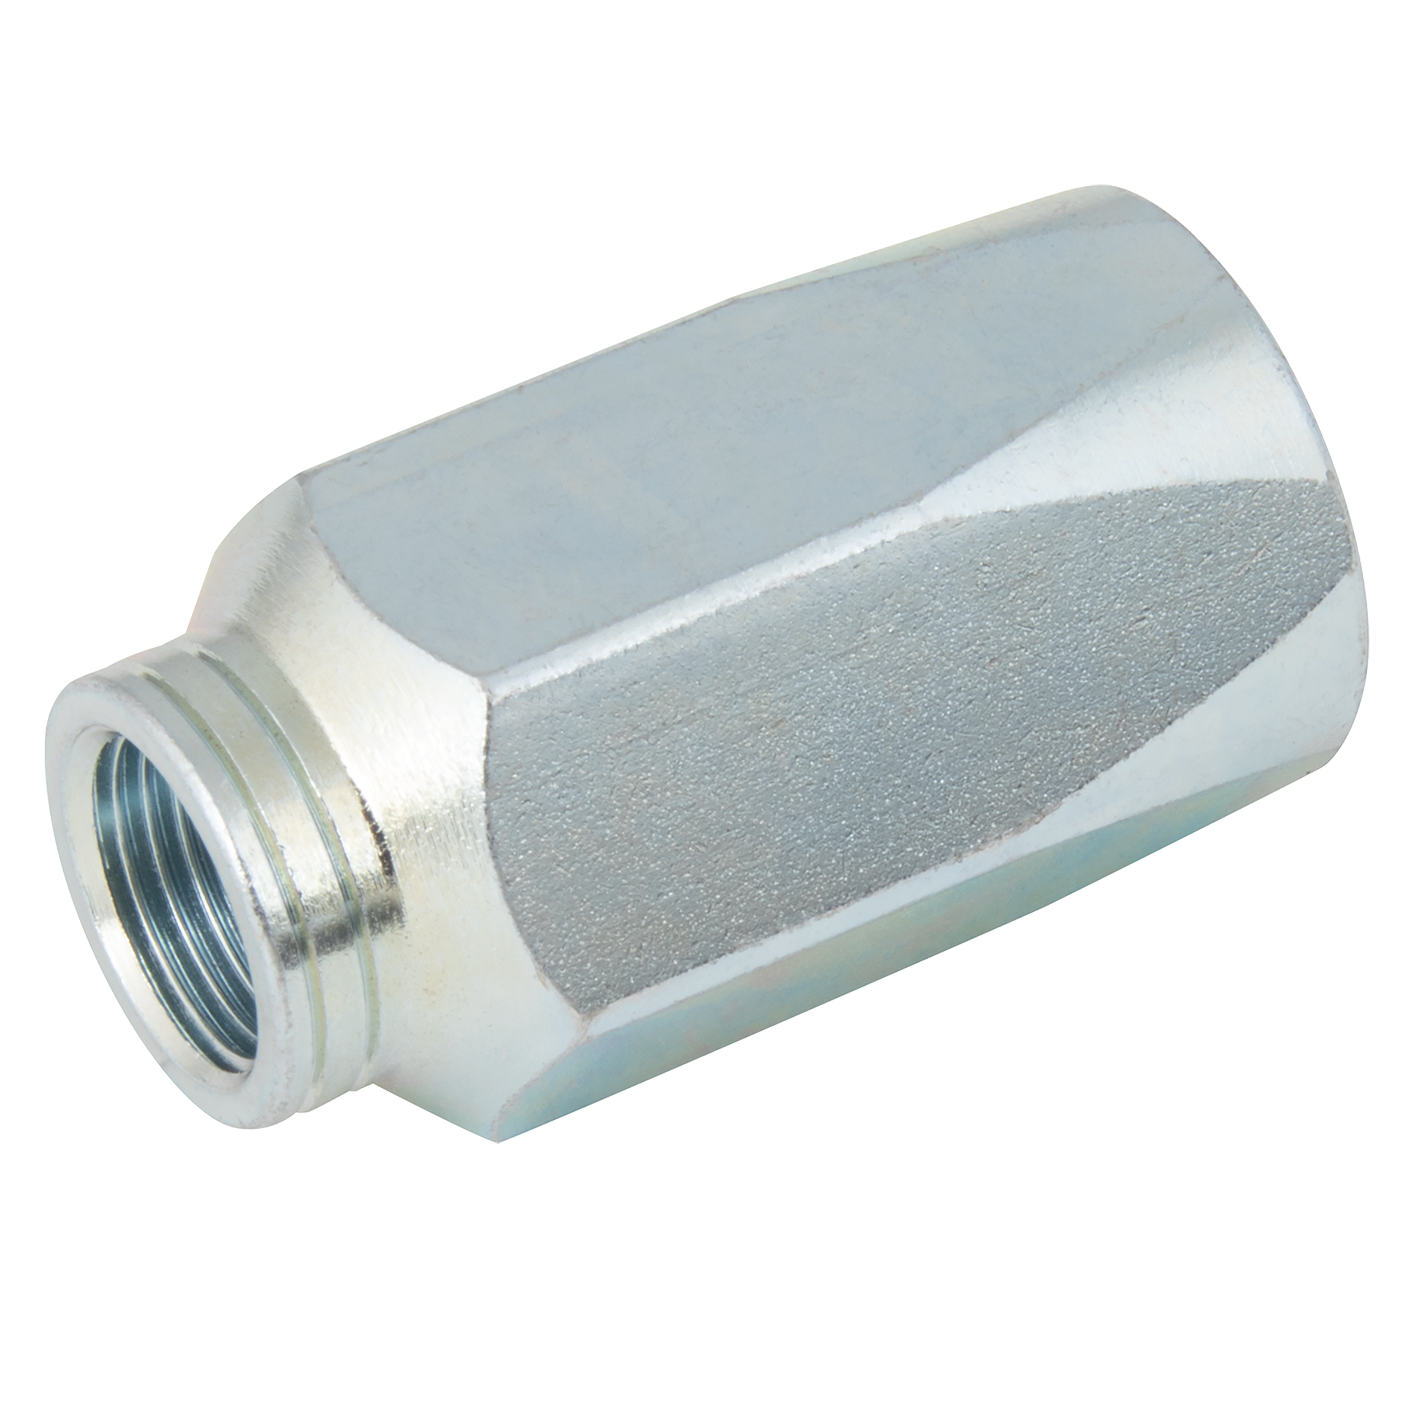 Hydraulic Reusable Ferrule R2AT Non-skive Hose ID 1/2"